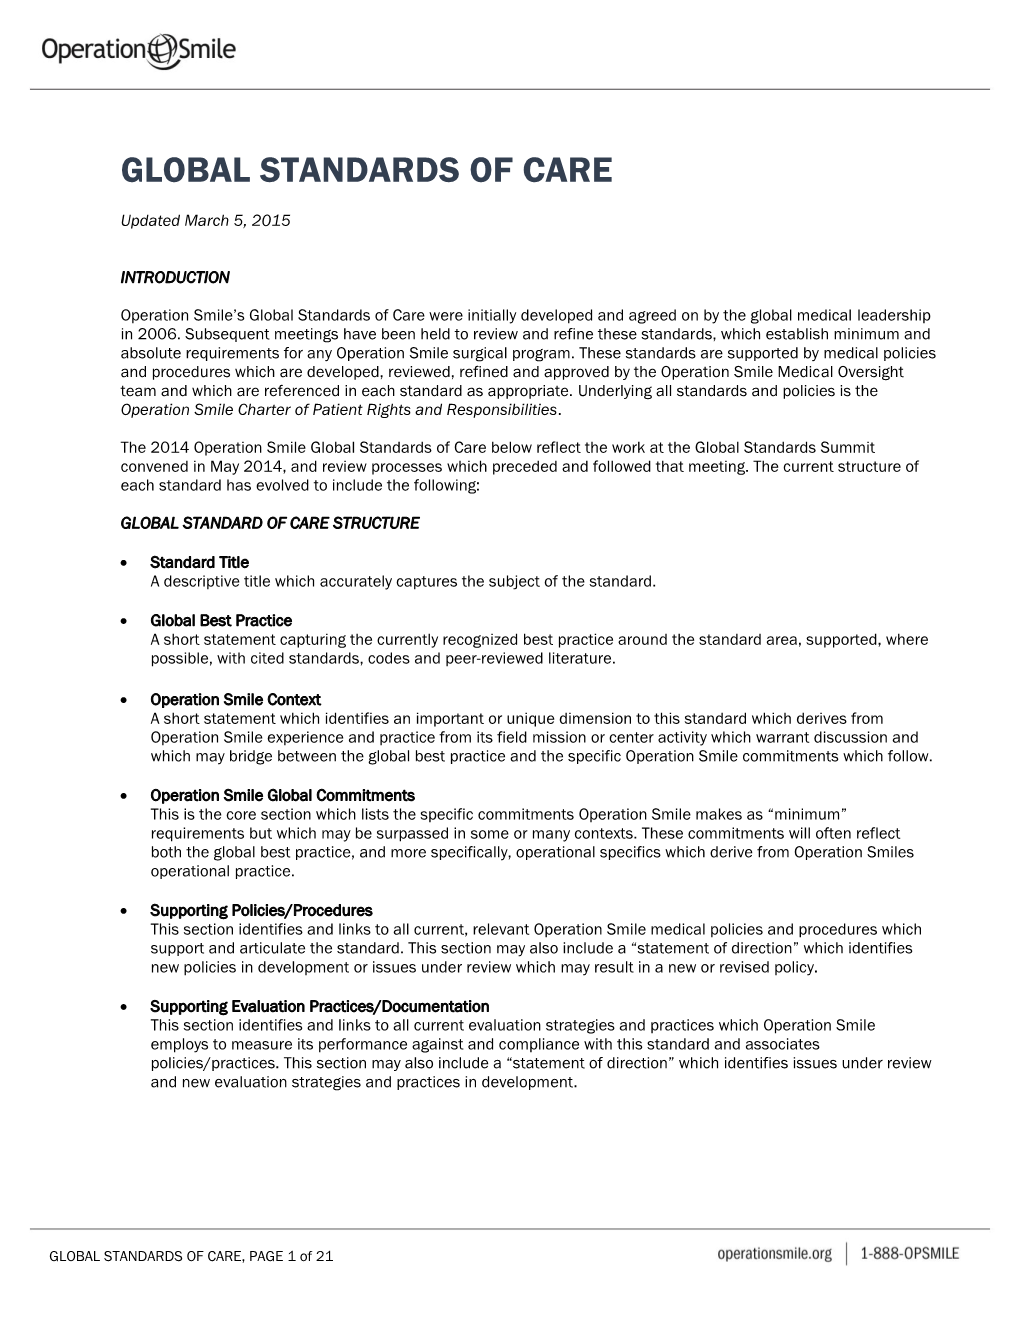 Global Standards of Care